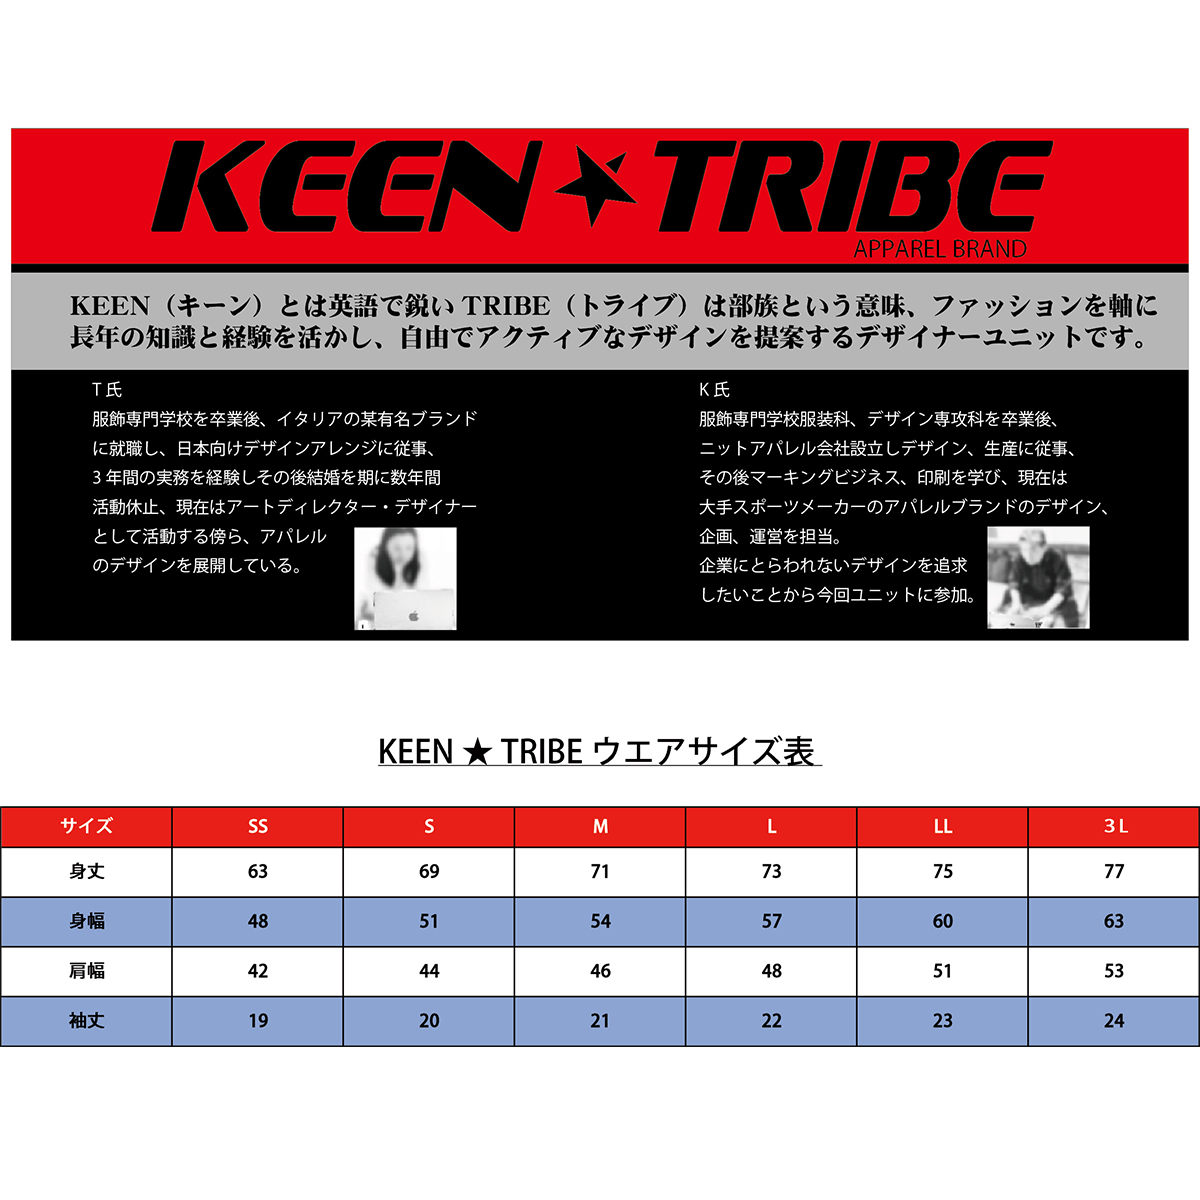 KEEN ★ TRIBE　KT-31(受注生産)